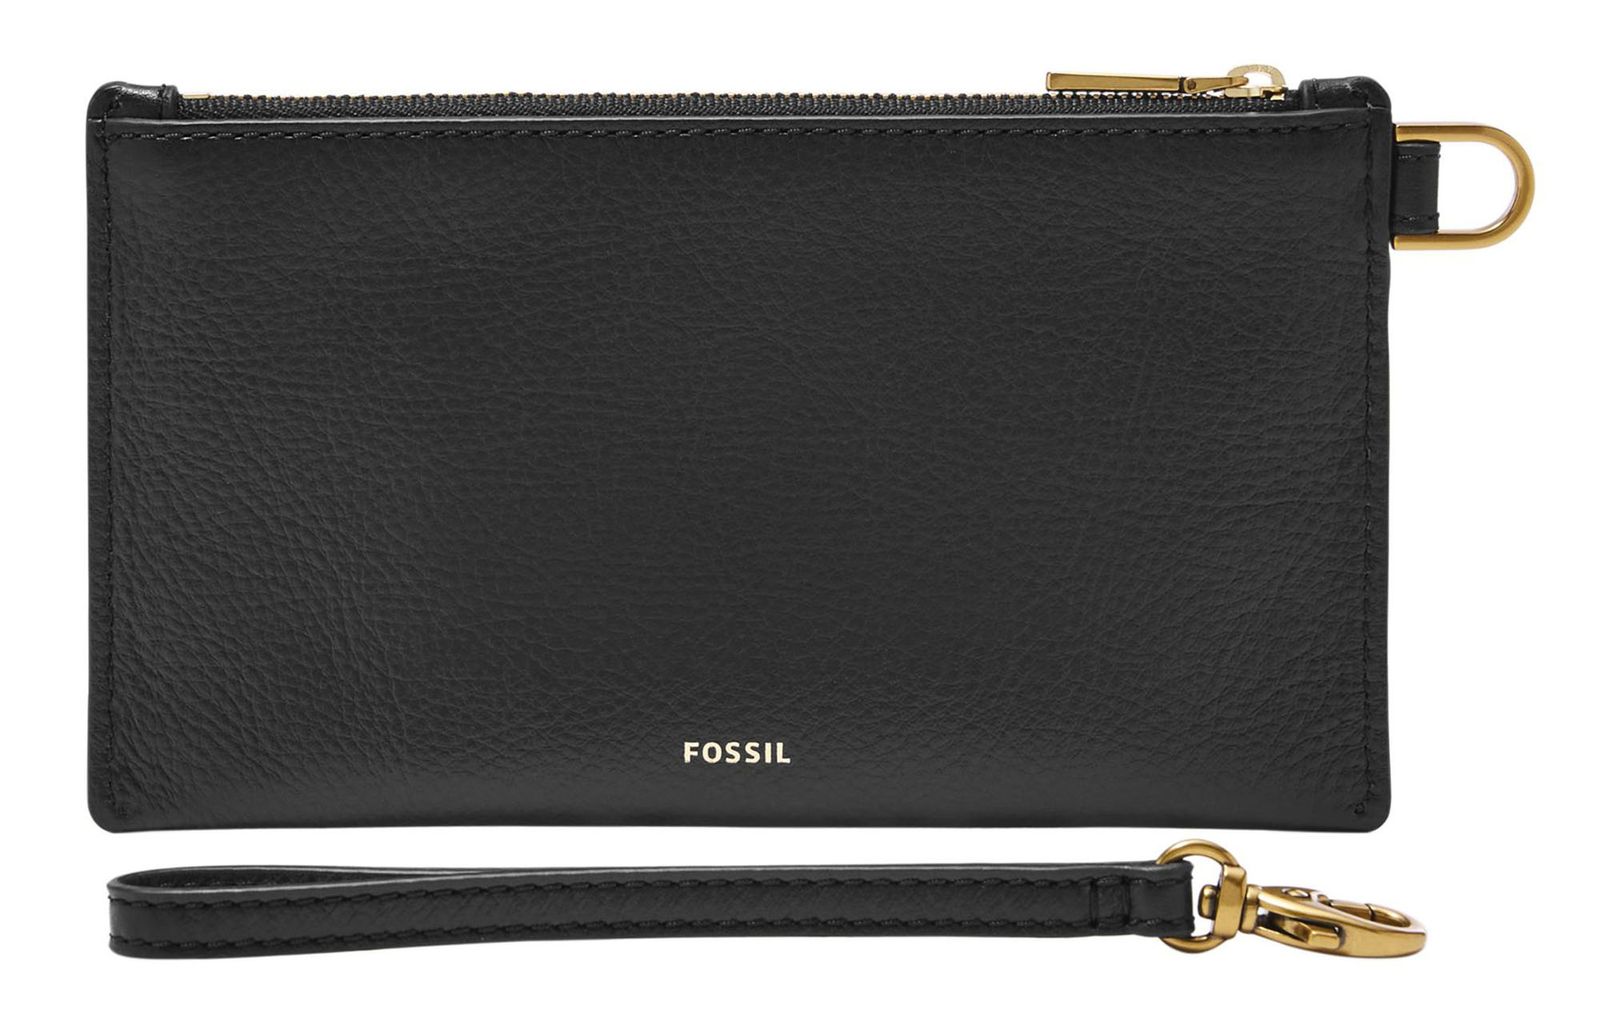 FOSSIL Gift Wristlet S Black | Buy bags, purses & accessories online